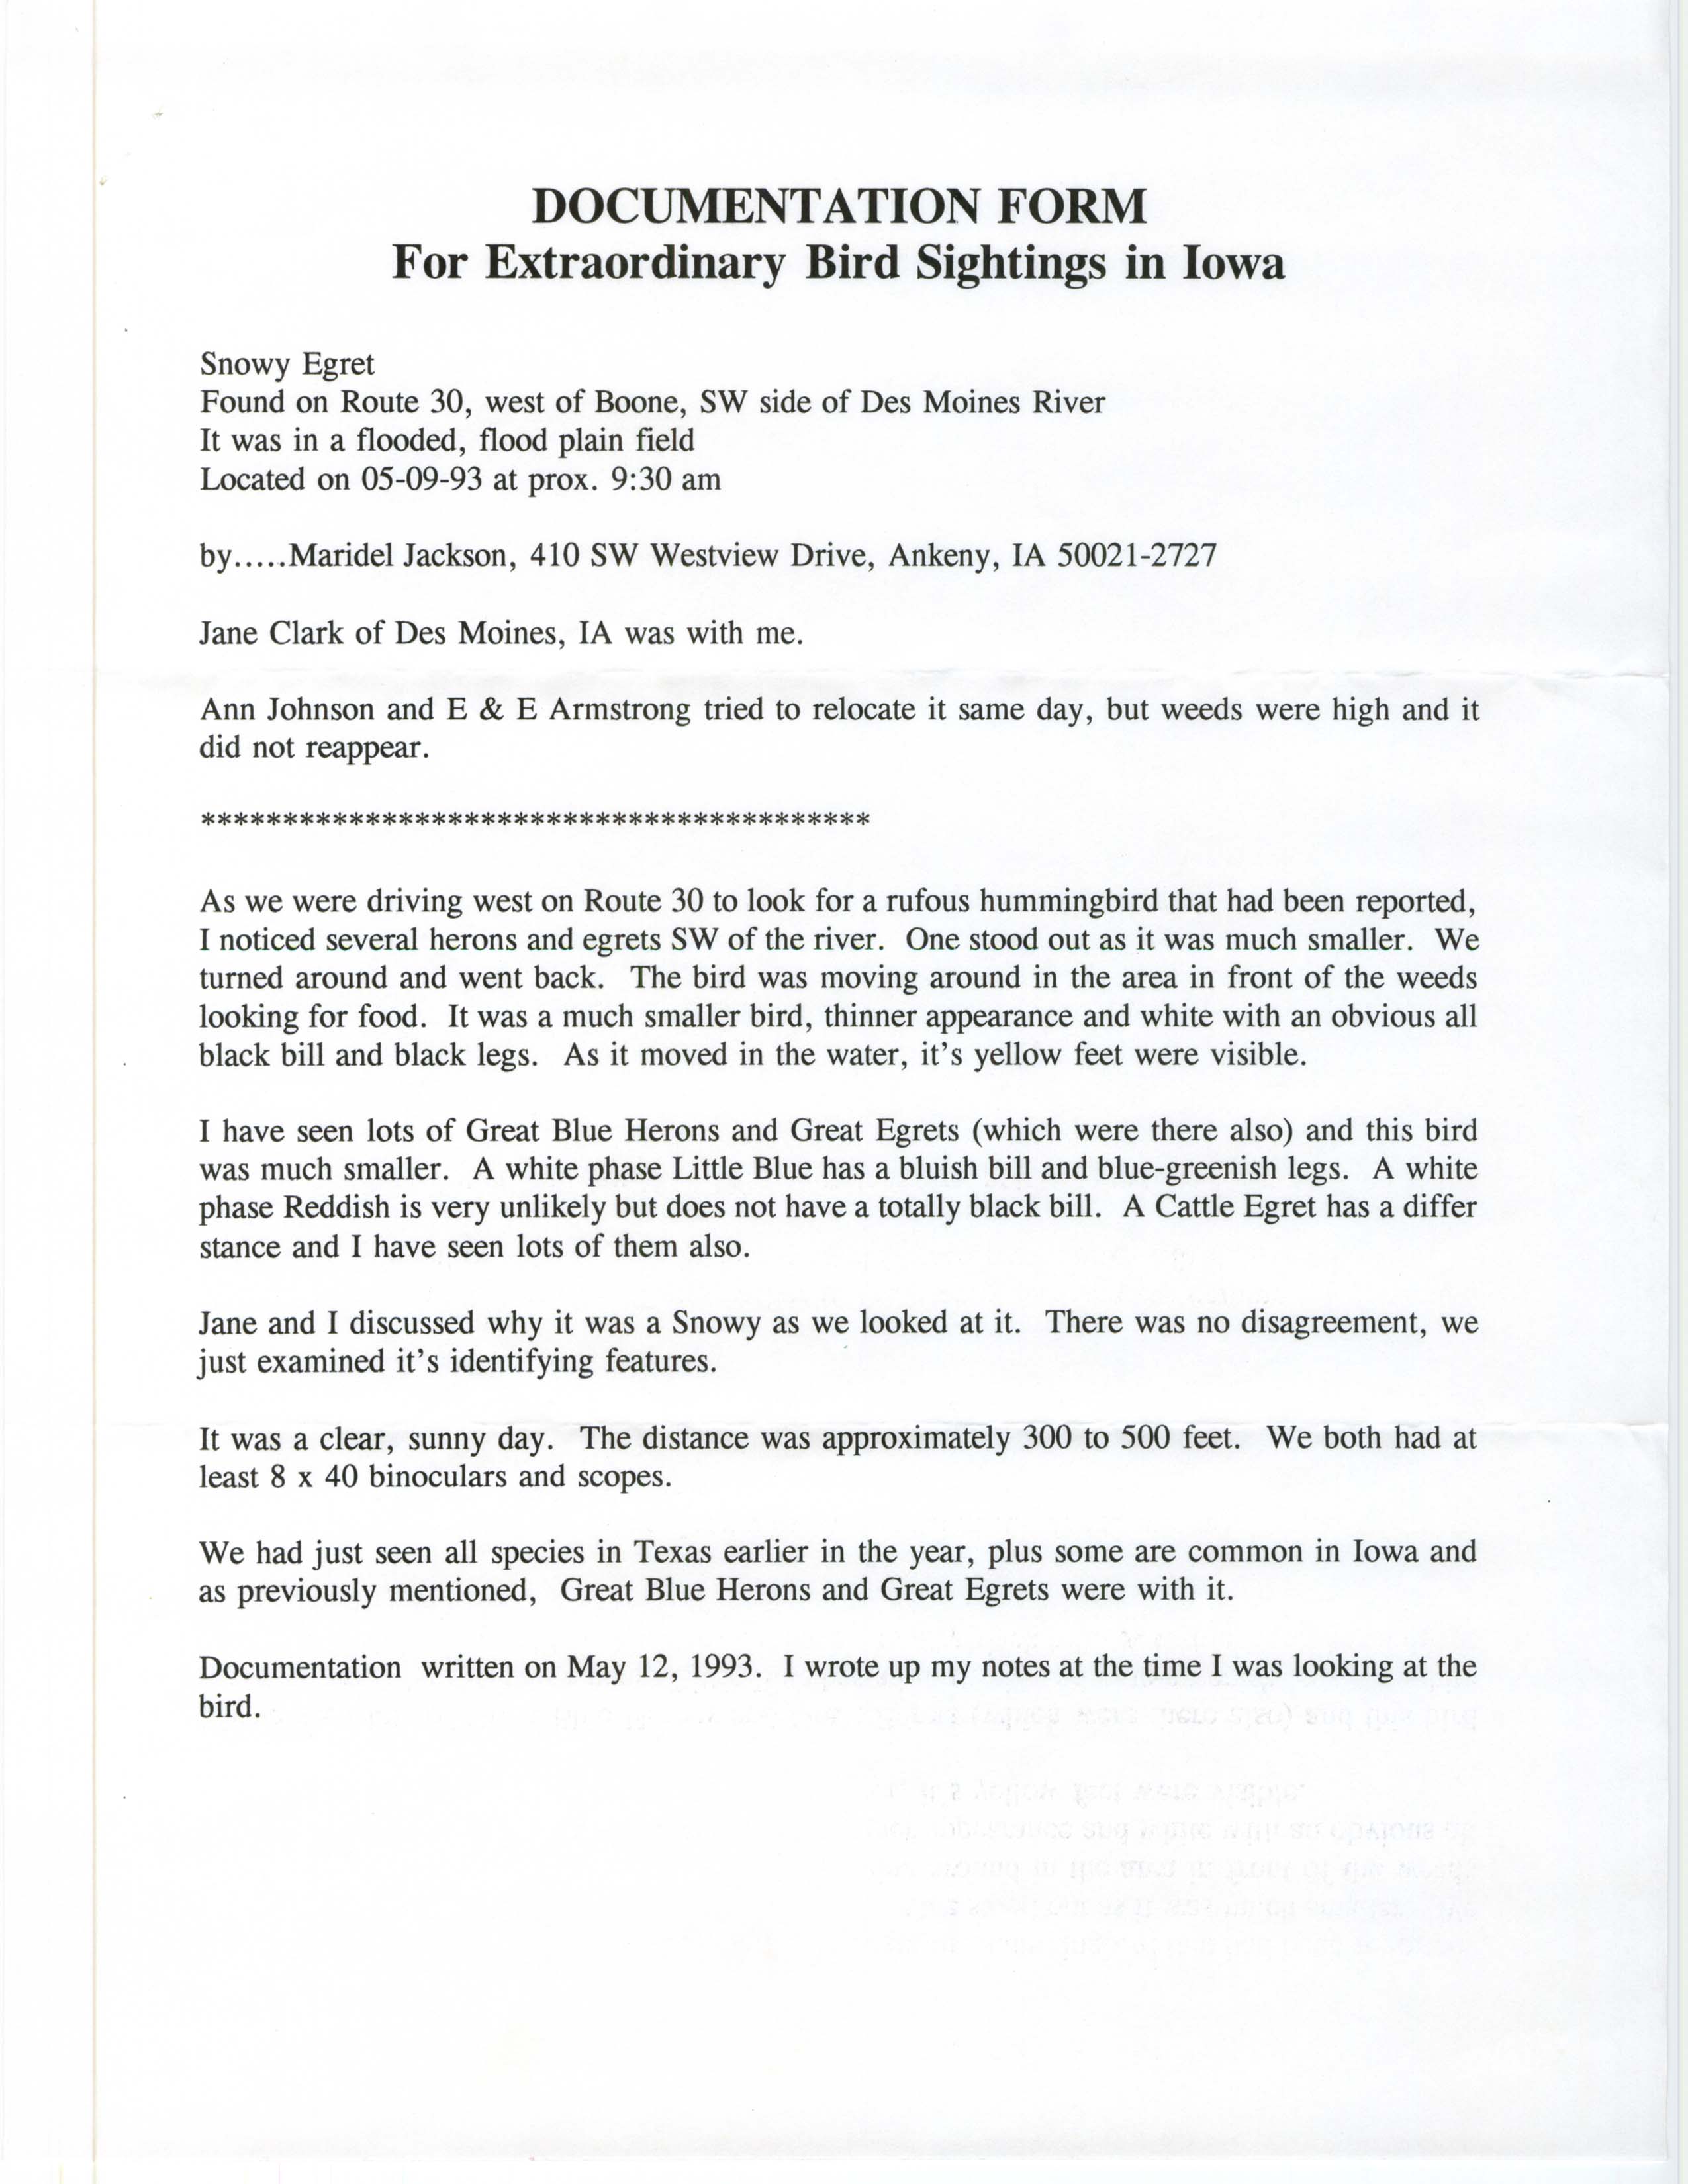 Rare bird documentation form for Snowy Egret west of Boone on the Des Moines River, 1993